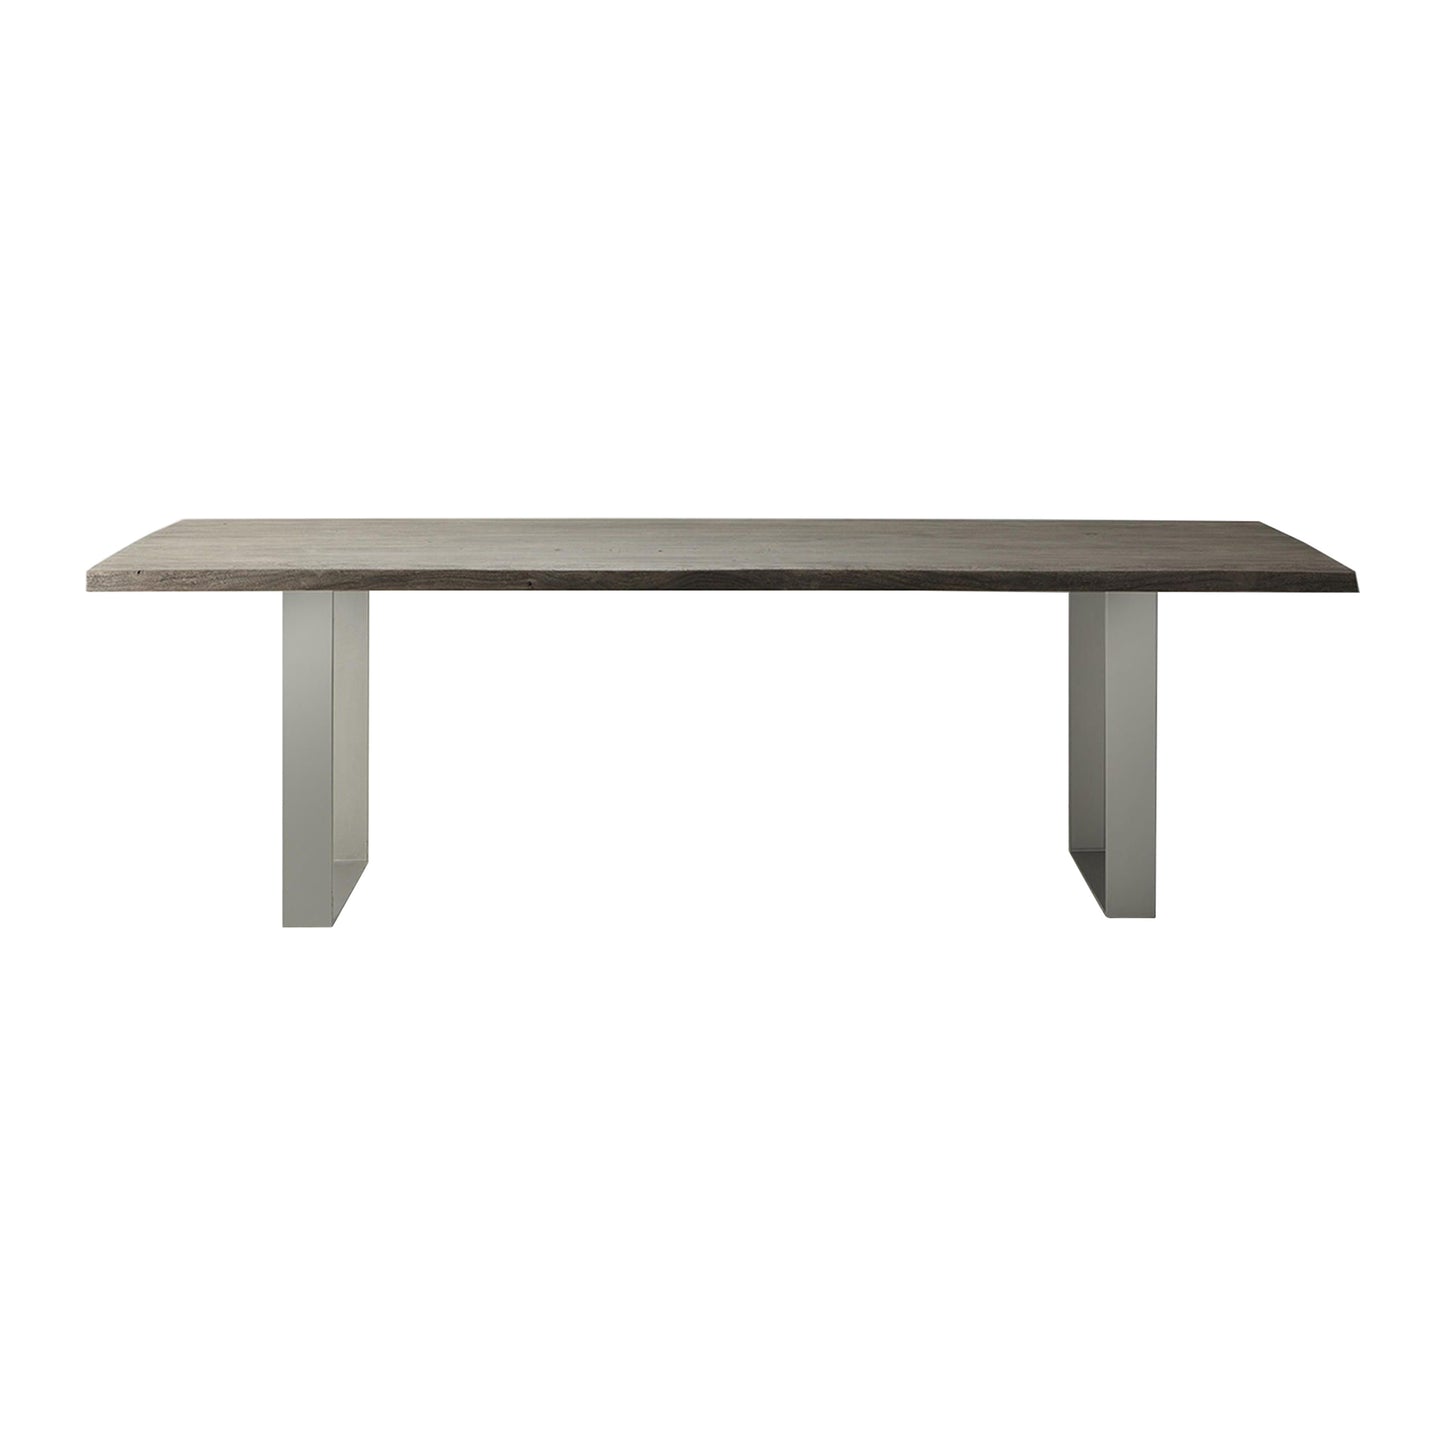 A grey wood dining table with metal legs, suitable for home furniture and interior decor.